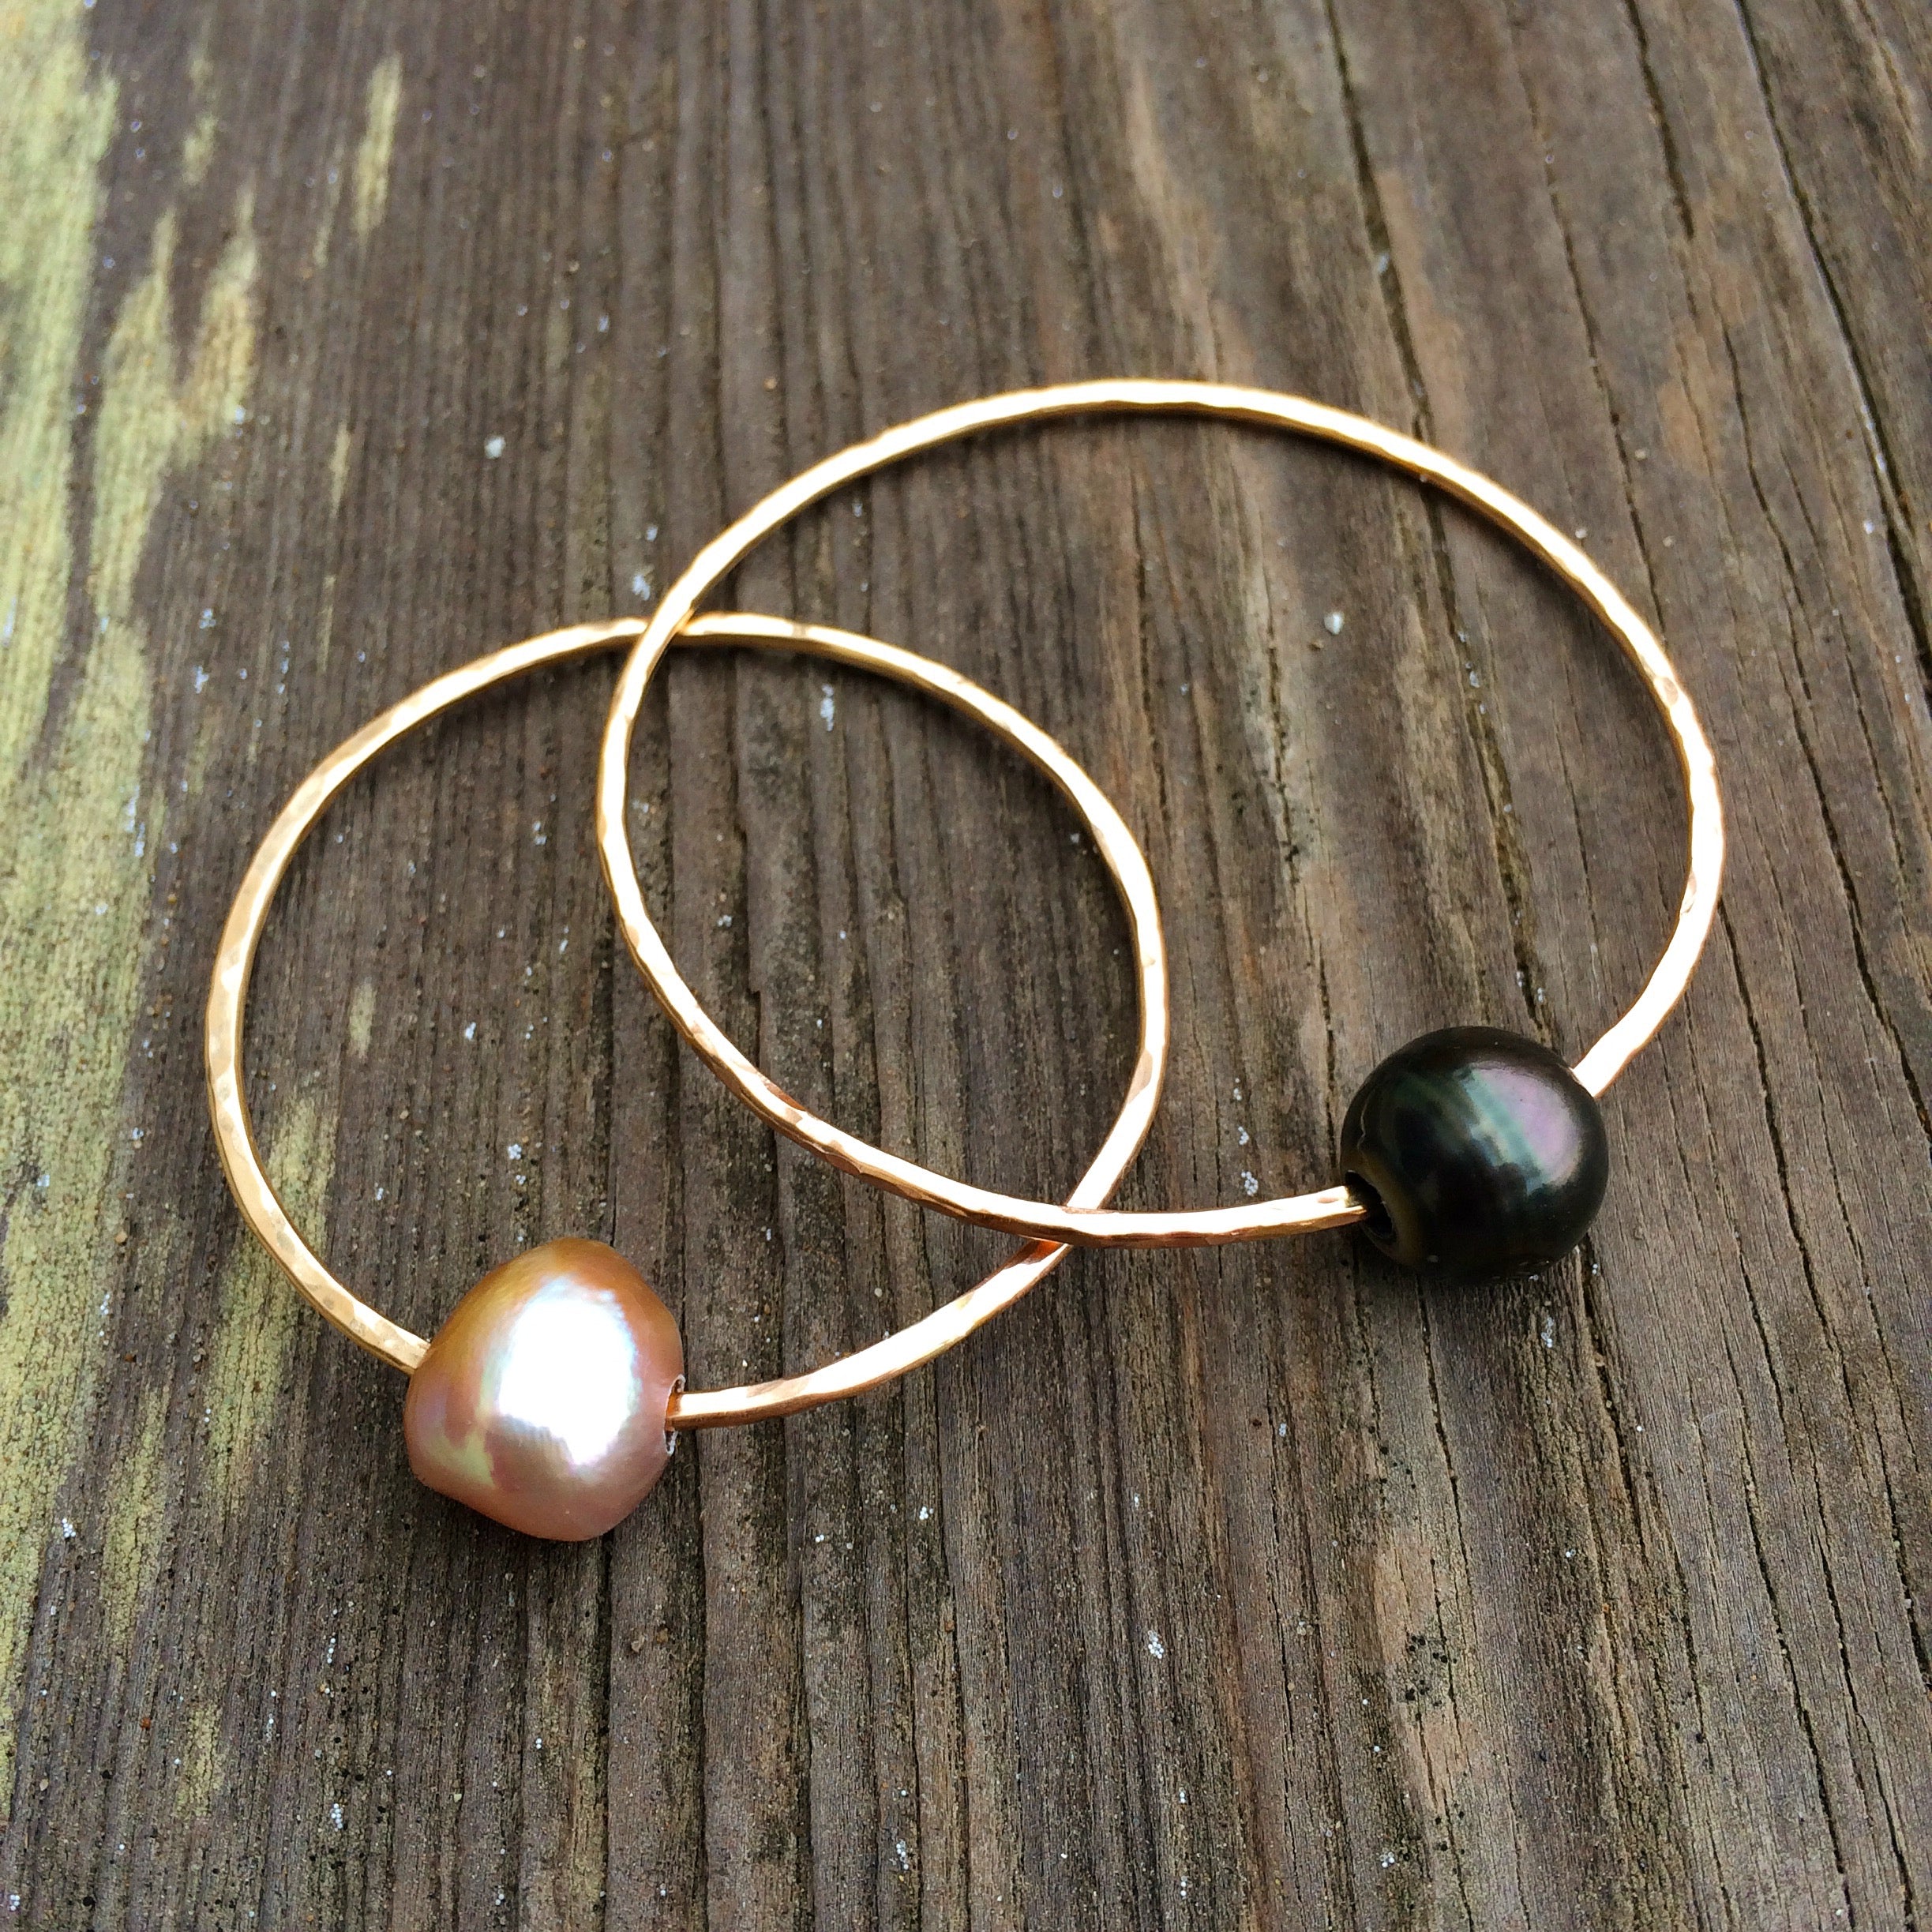 on a dark wood background are two bangles, one with a pink pearl and one with a black pearl.